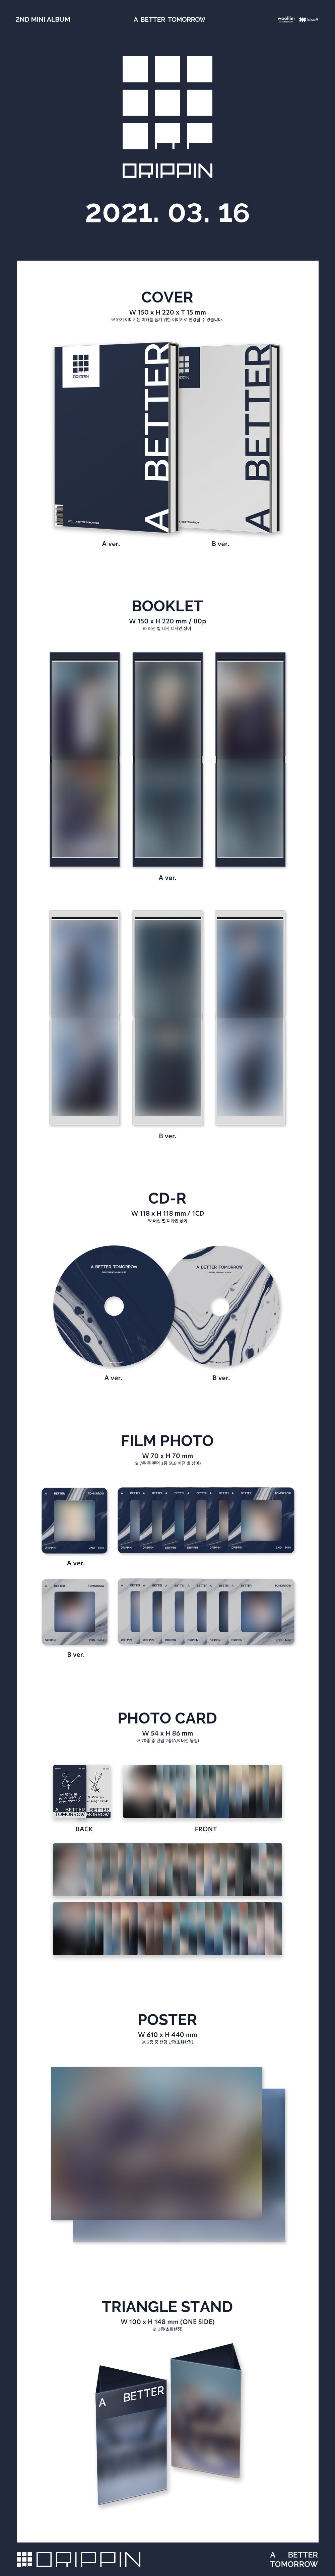 1 CD
1 Booklet (80 pages)
1 Film Photo
2 Photo Cards